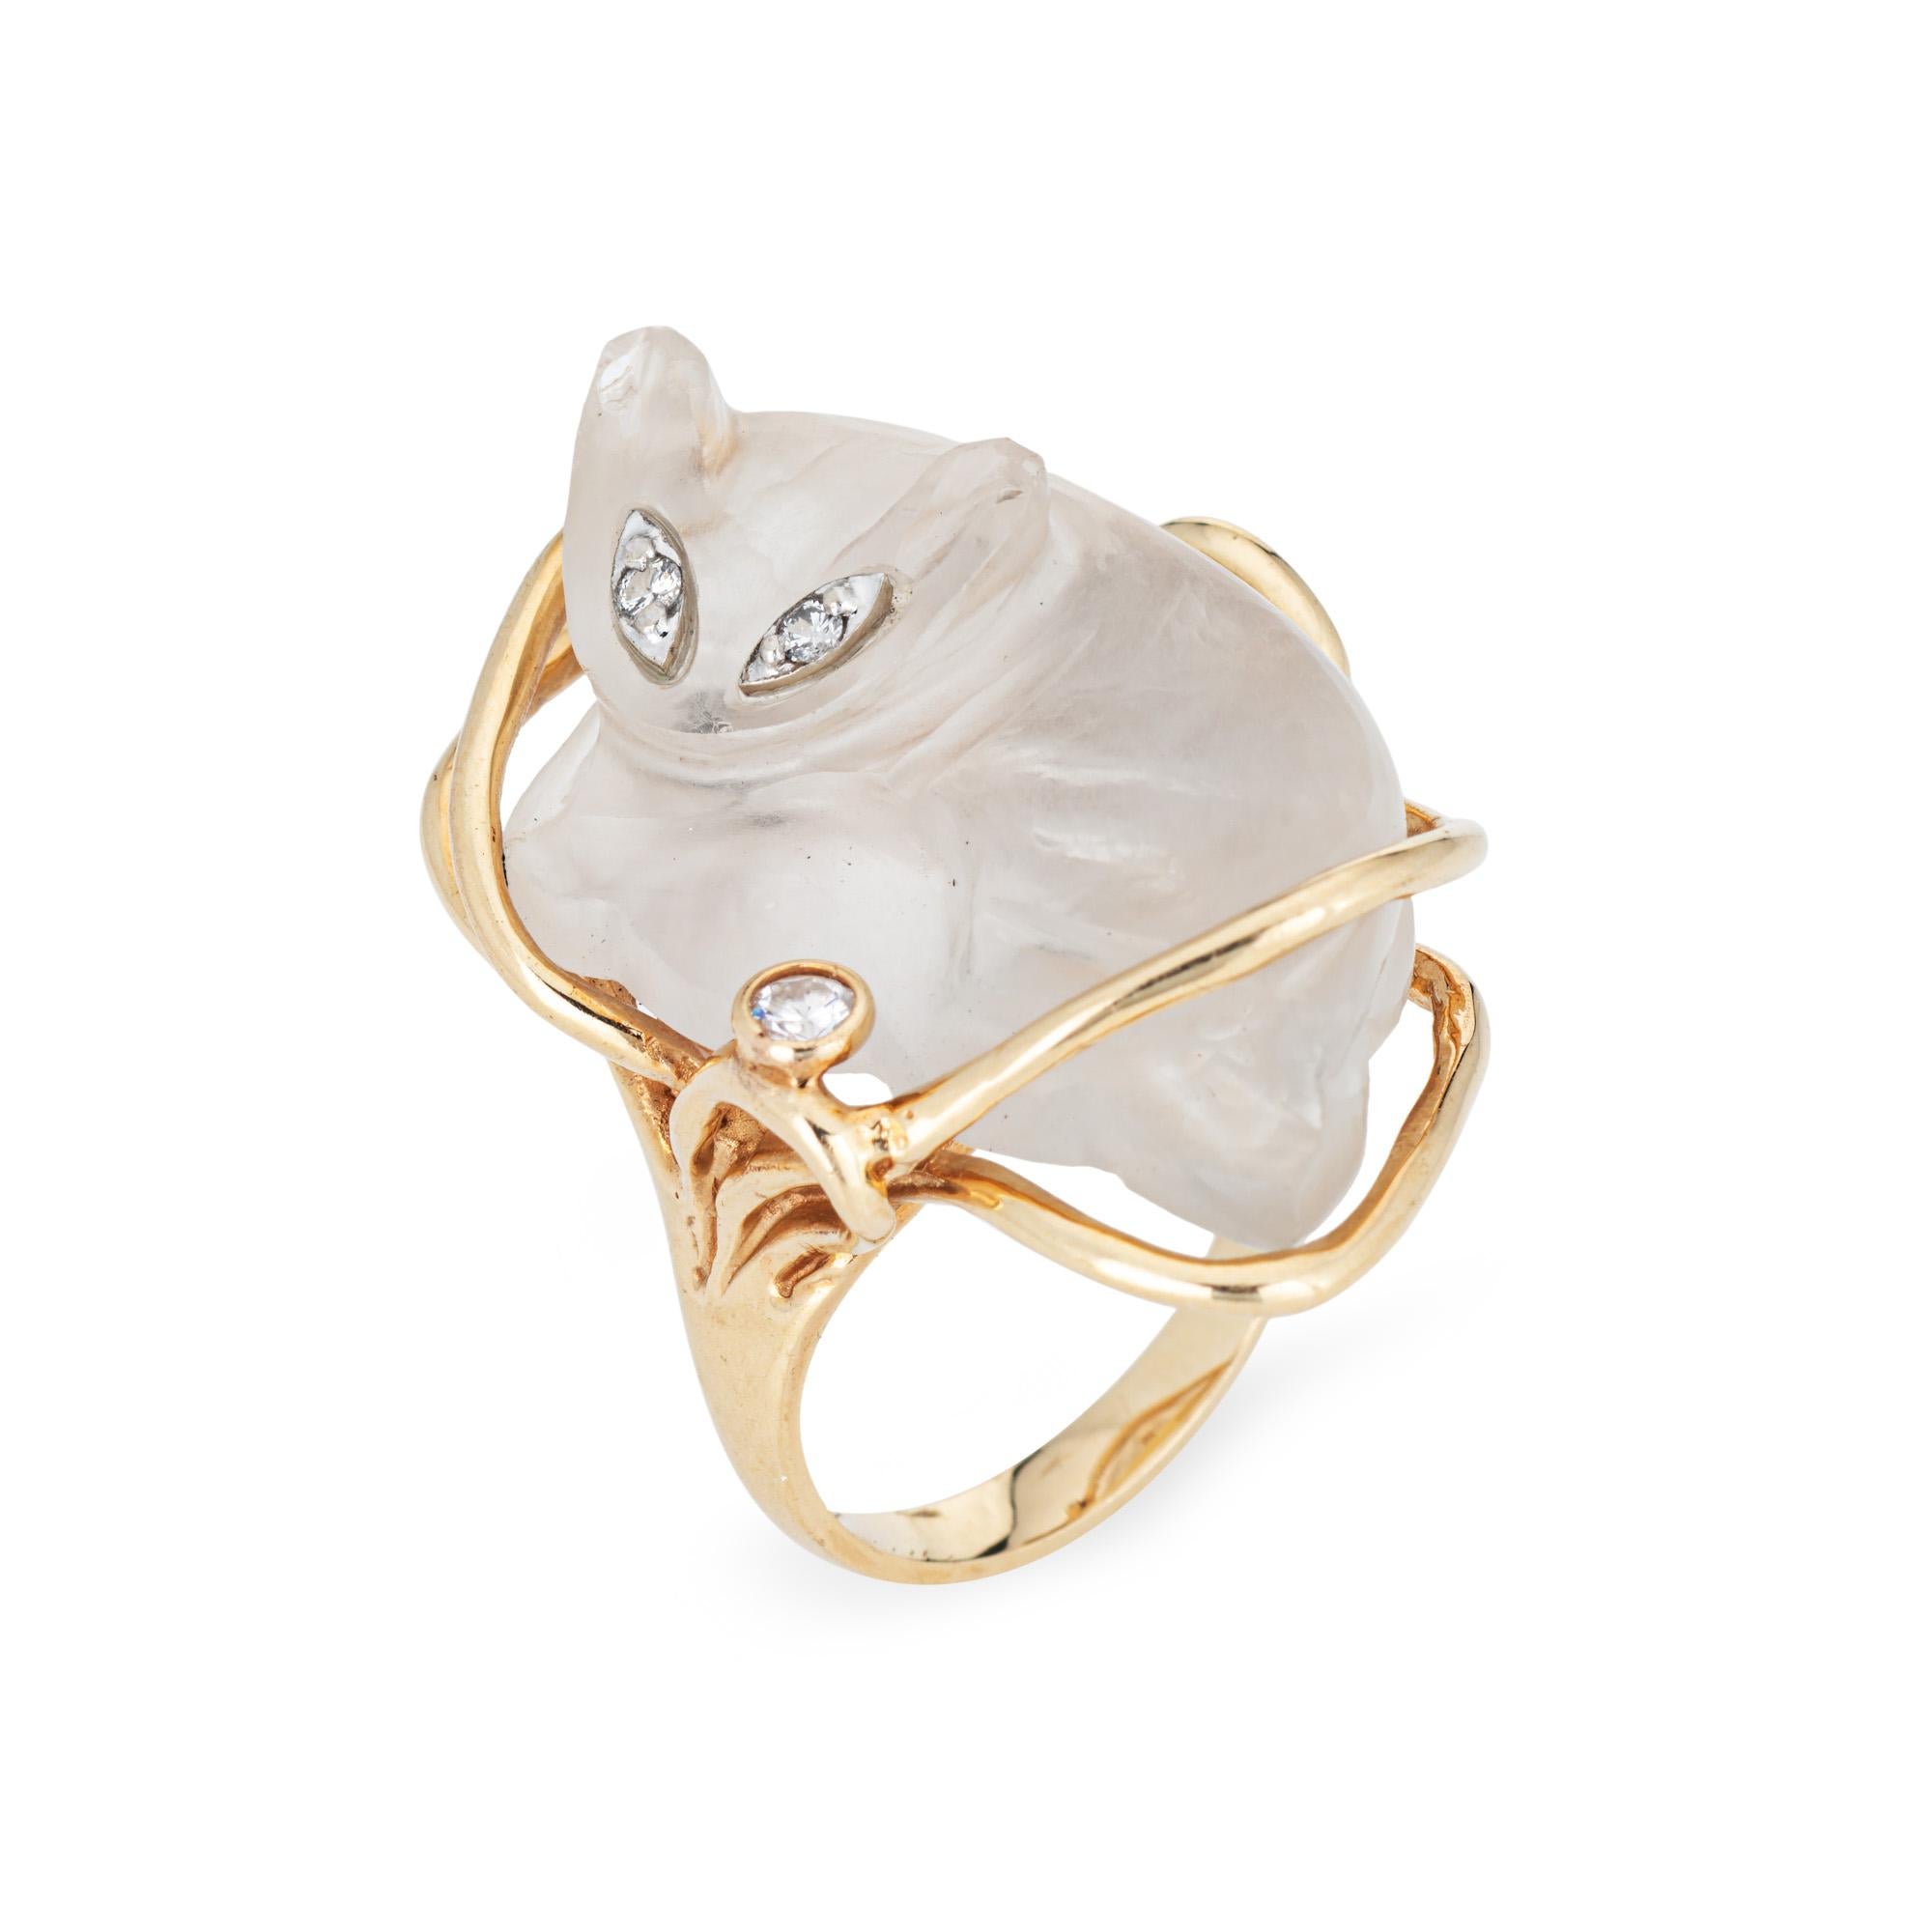 Distinct and stylish rock crystal cat ring crafted in 14 karat yellow gold (circa 1974). 

Rock crystal measures 30mm x 20mm. Diamonds total an estimated 0.04 carats (estimated at H-I color and SI1-2 clarity). Note: few small chips to cat's ears